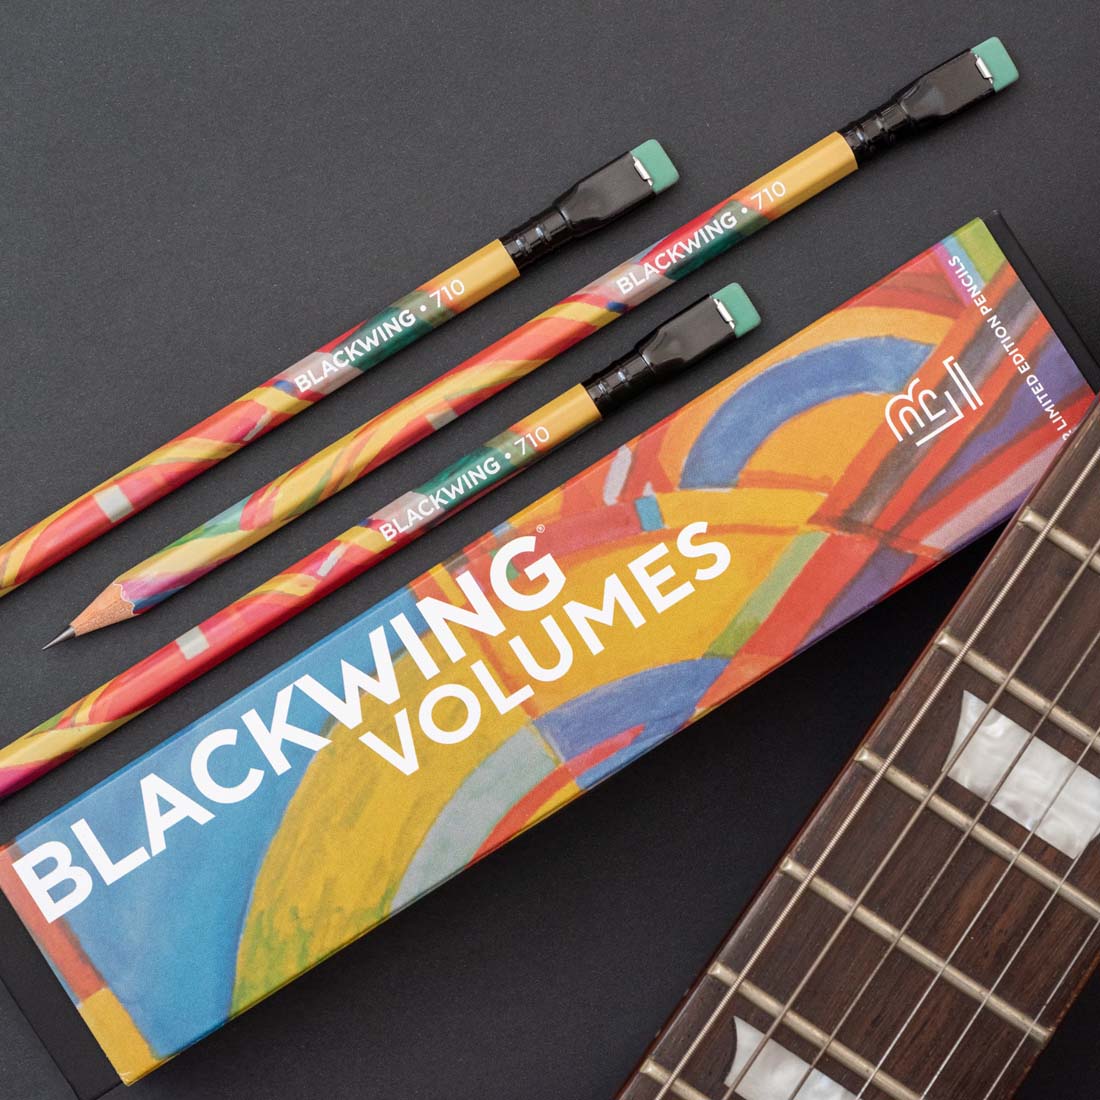 Blackwing Vol. 710 The Jerry Garcia Edition